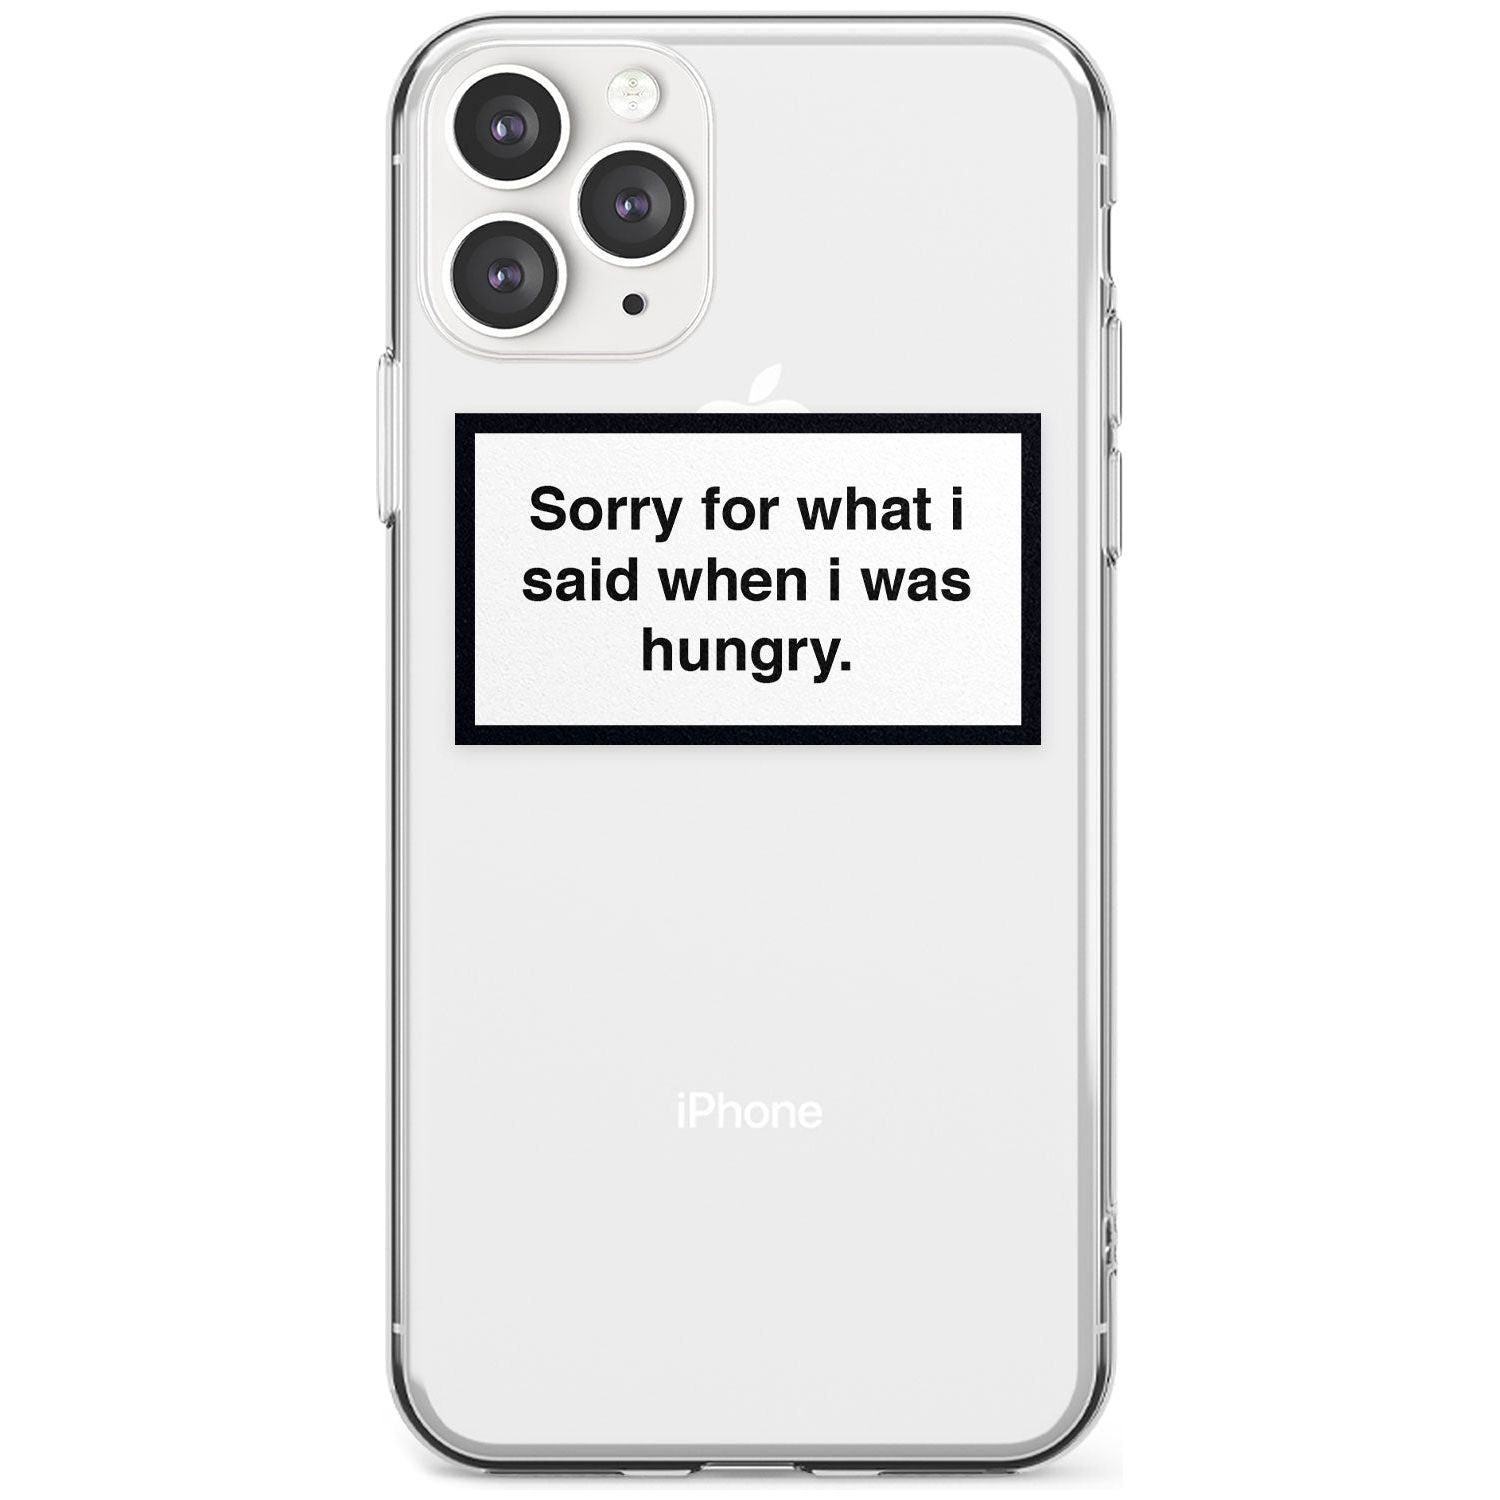 Sorry for what I said iPhone Case  Slim Case Phone Case - Case Warehouse